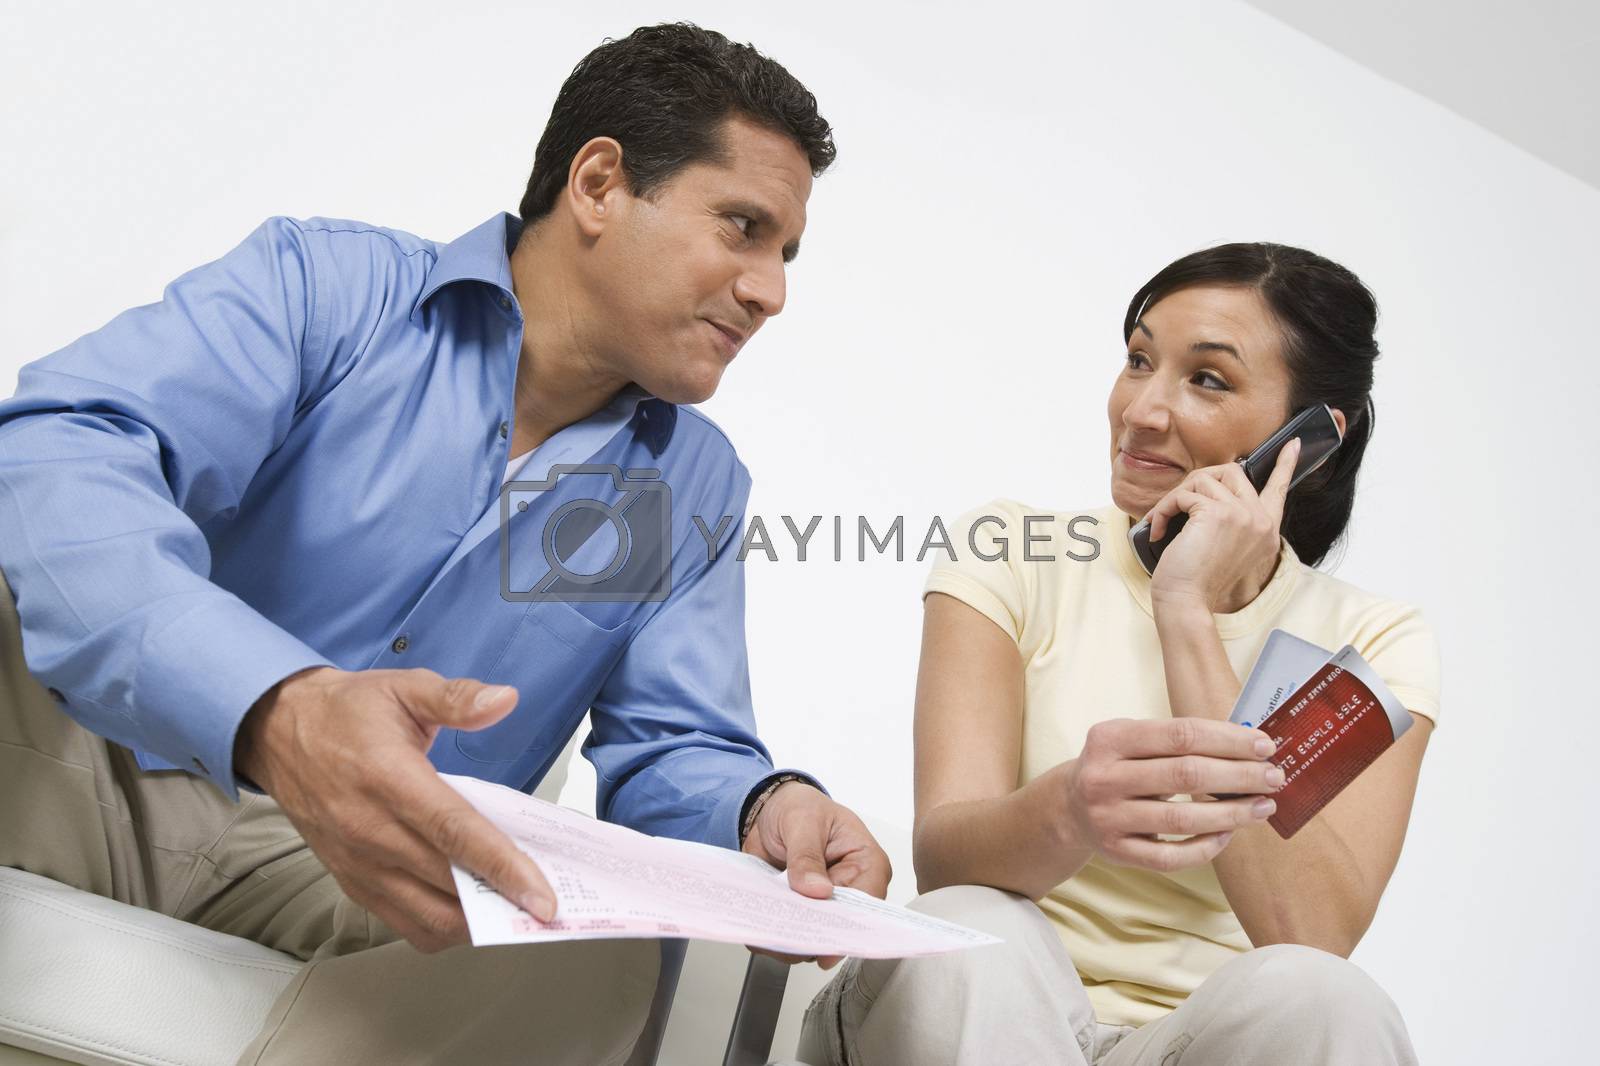 Royalty free image of Woman with credit cards on call looking at man holding bill by moodboard